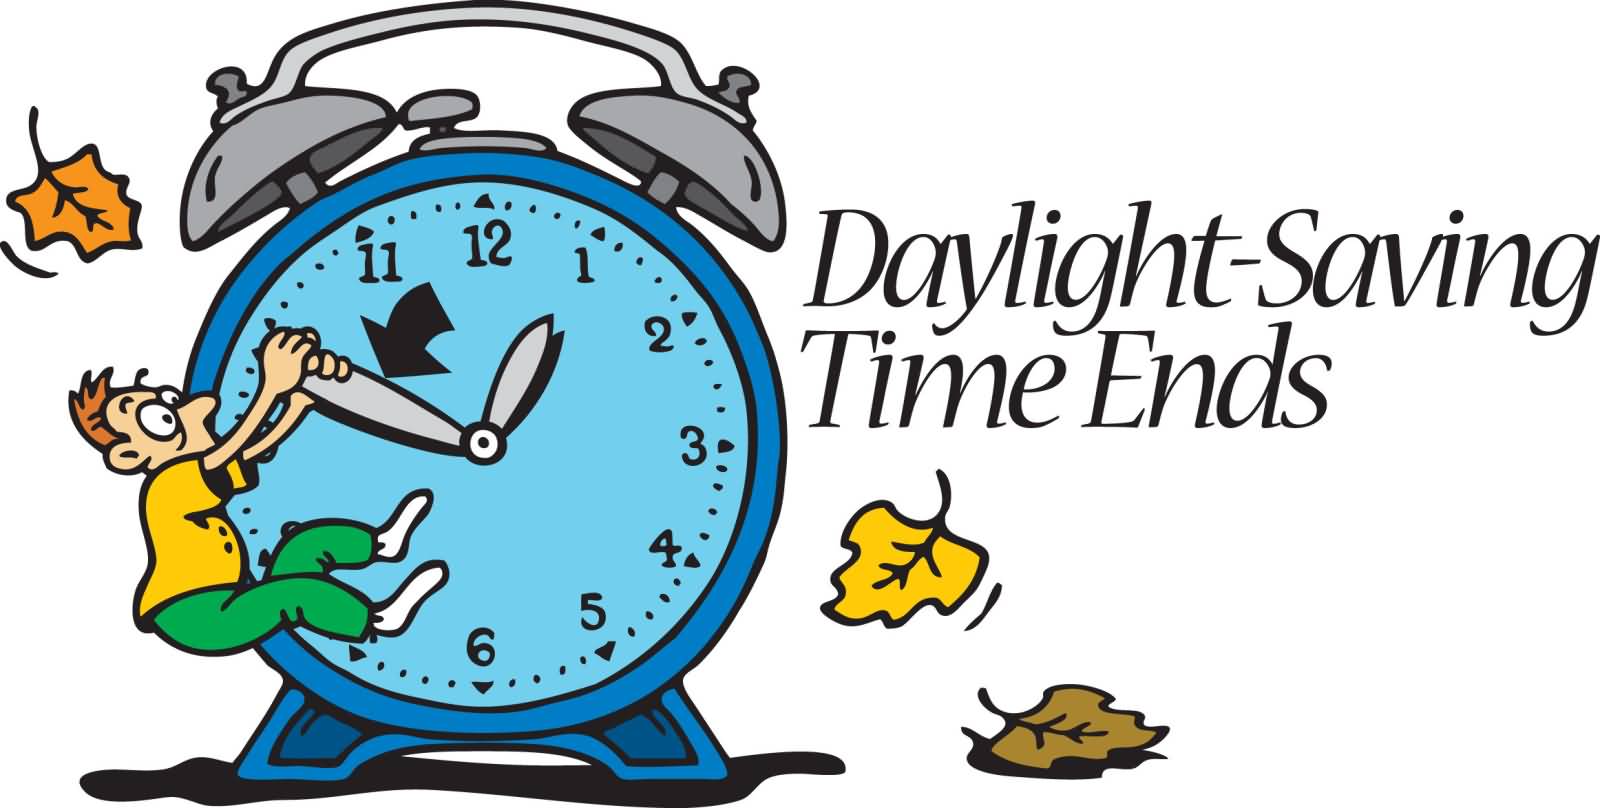 50 Amazing Daylight Saving Time Ends Wish Pictures